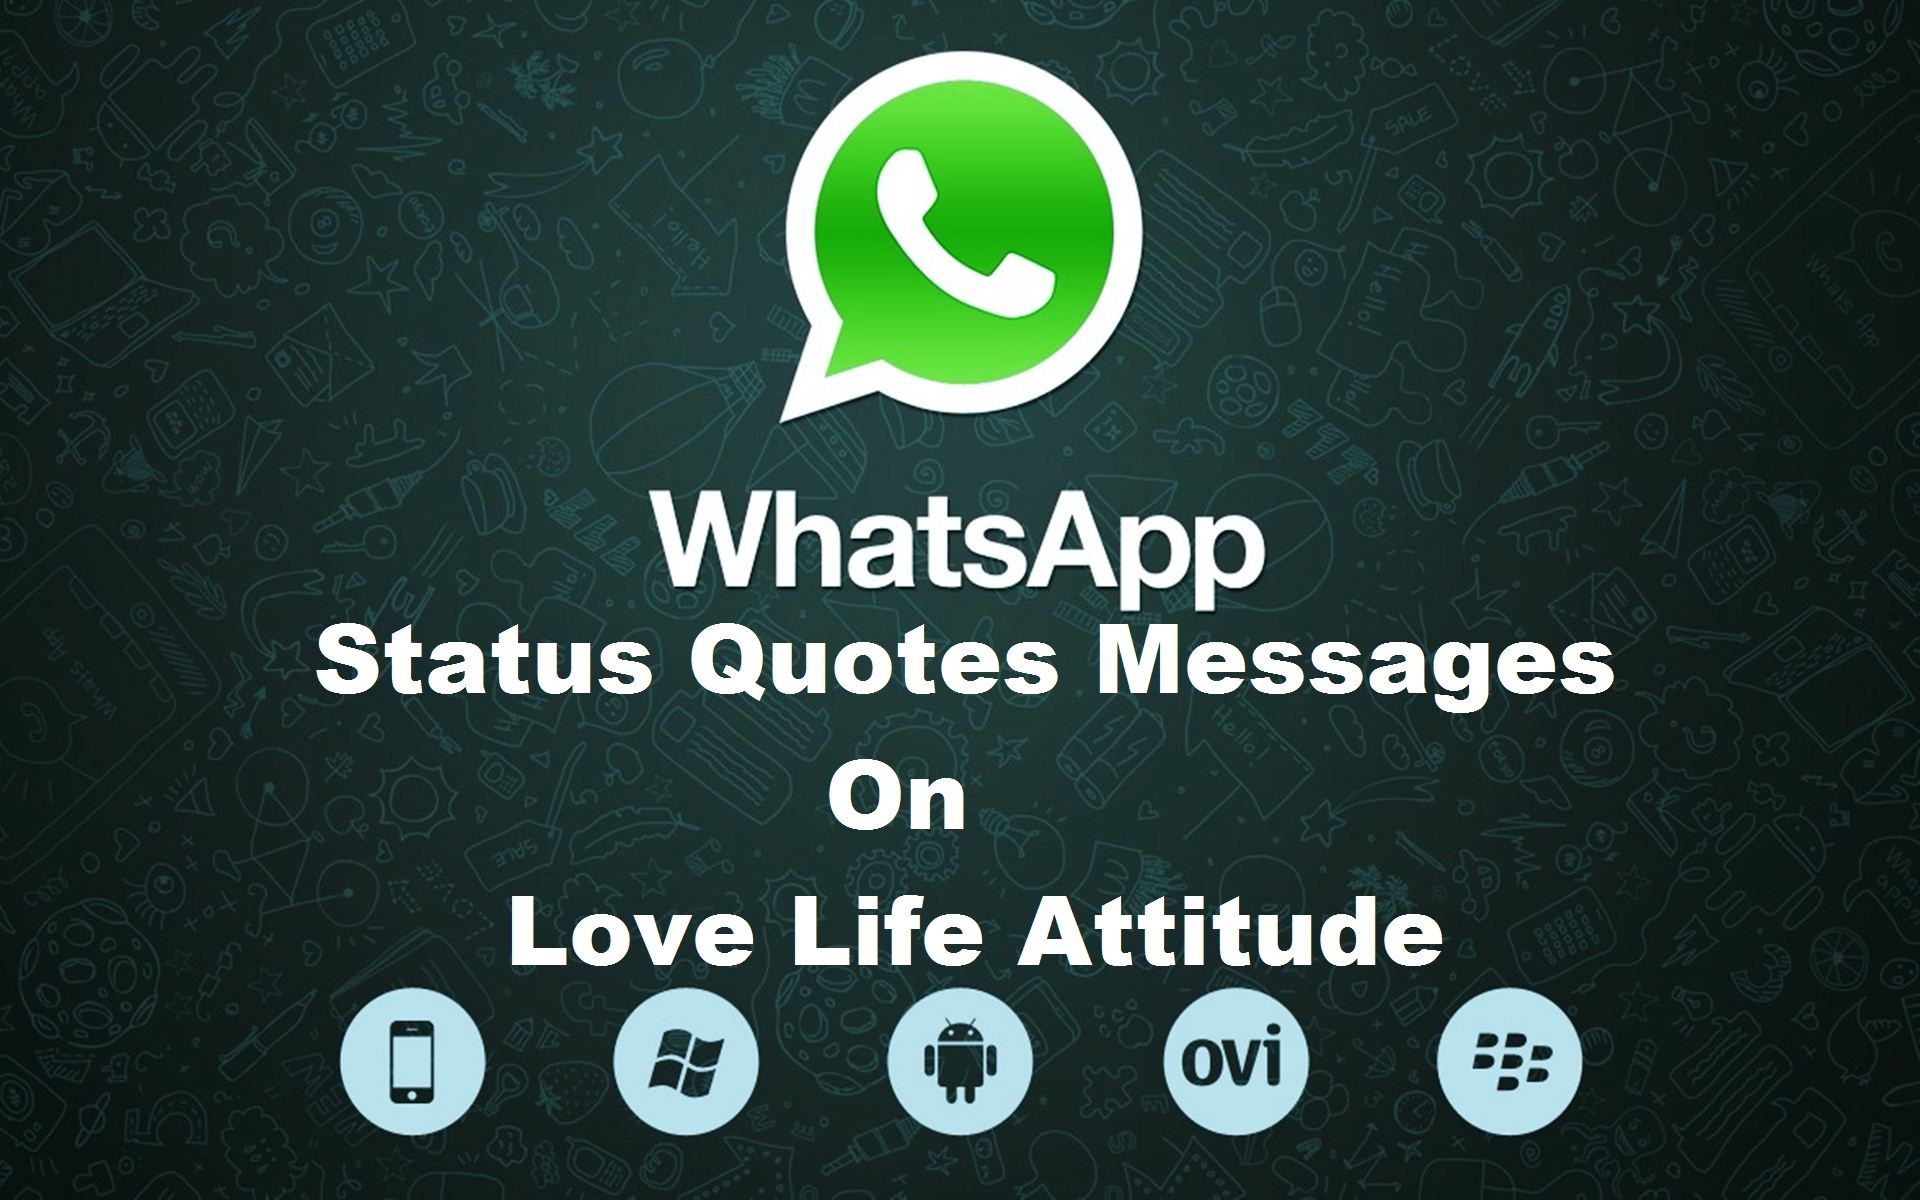 Romantic Breakup Whats app Status - Now days in every person life social me...